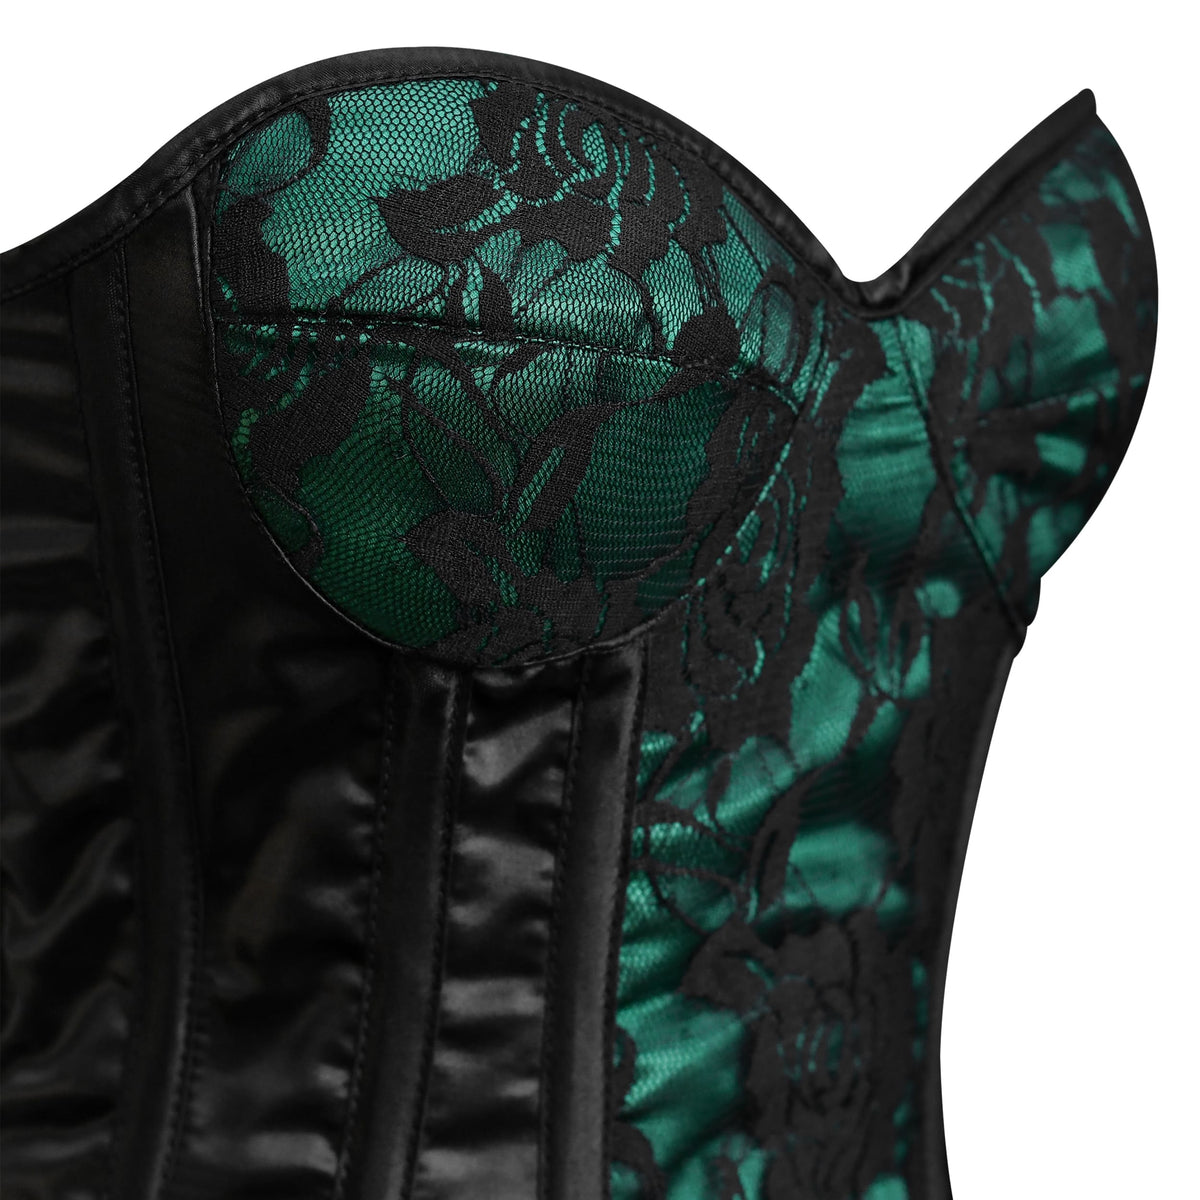 Green and Black corset top